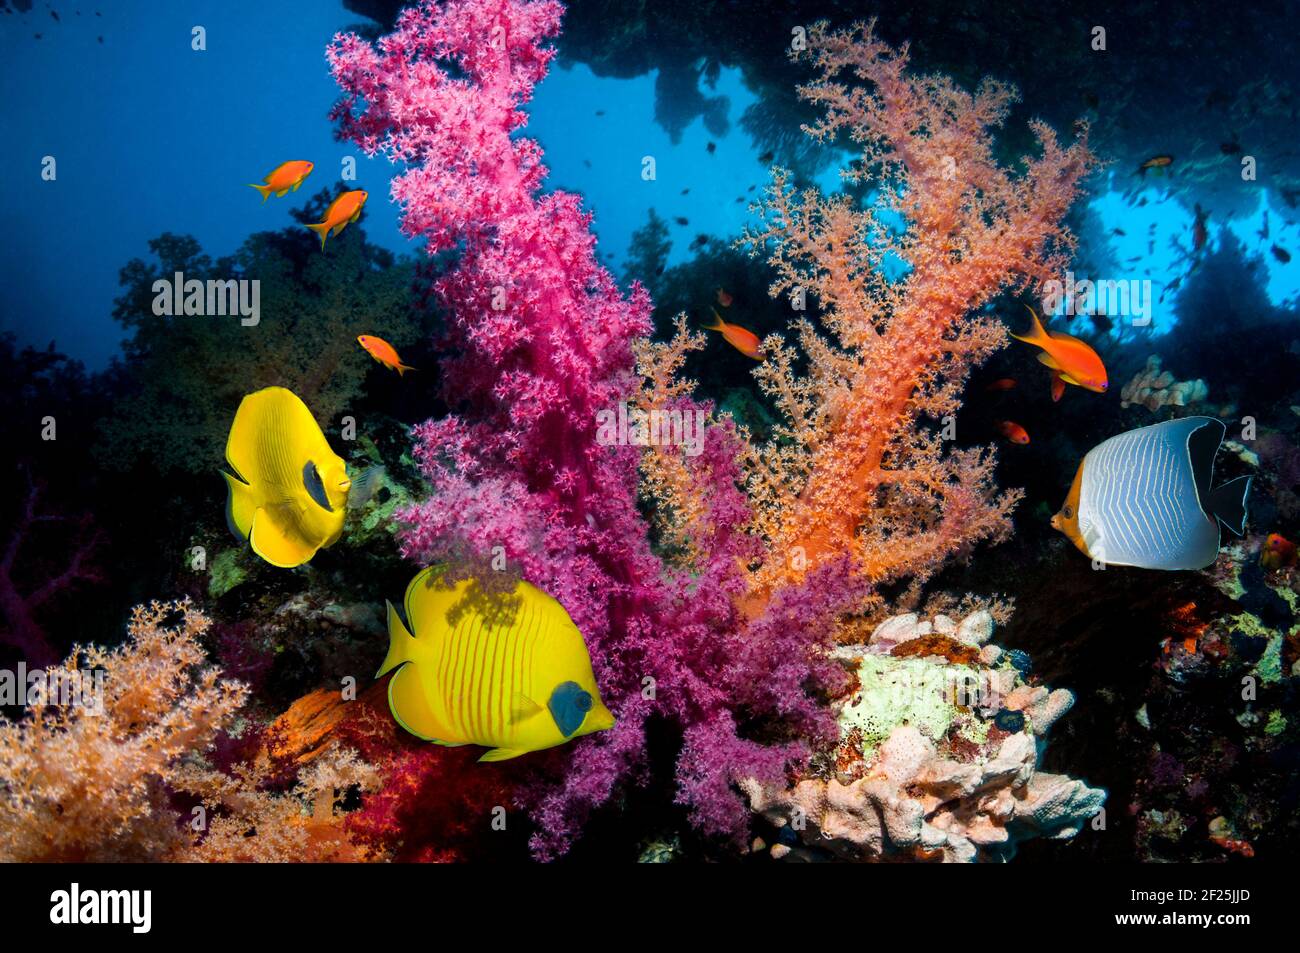 Coral reef scenery with a pair of Golden butterflyfish [Chaetodon semilarvatus] and a Orange face or Hooded butterflyfish [Chaetodon larvatus].  Egypt Stock Photo